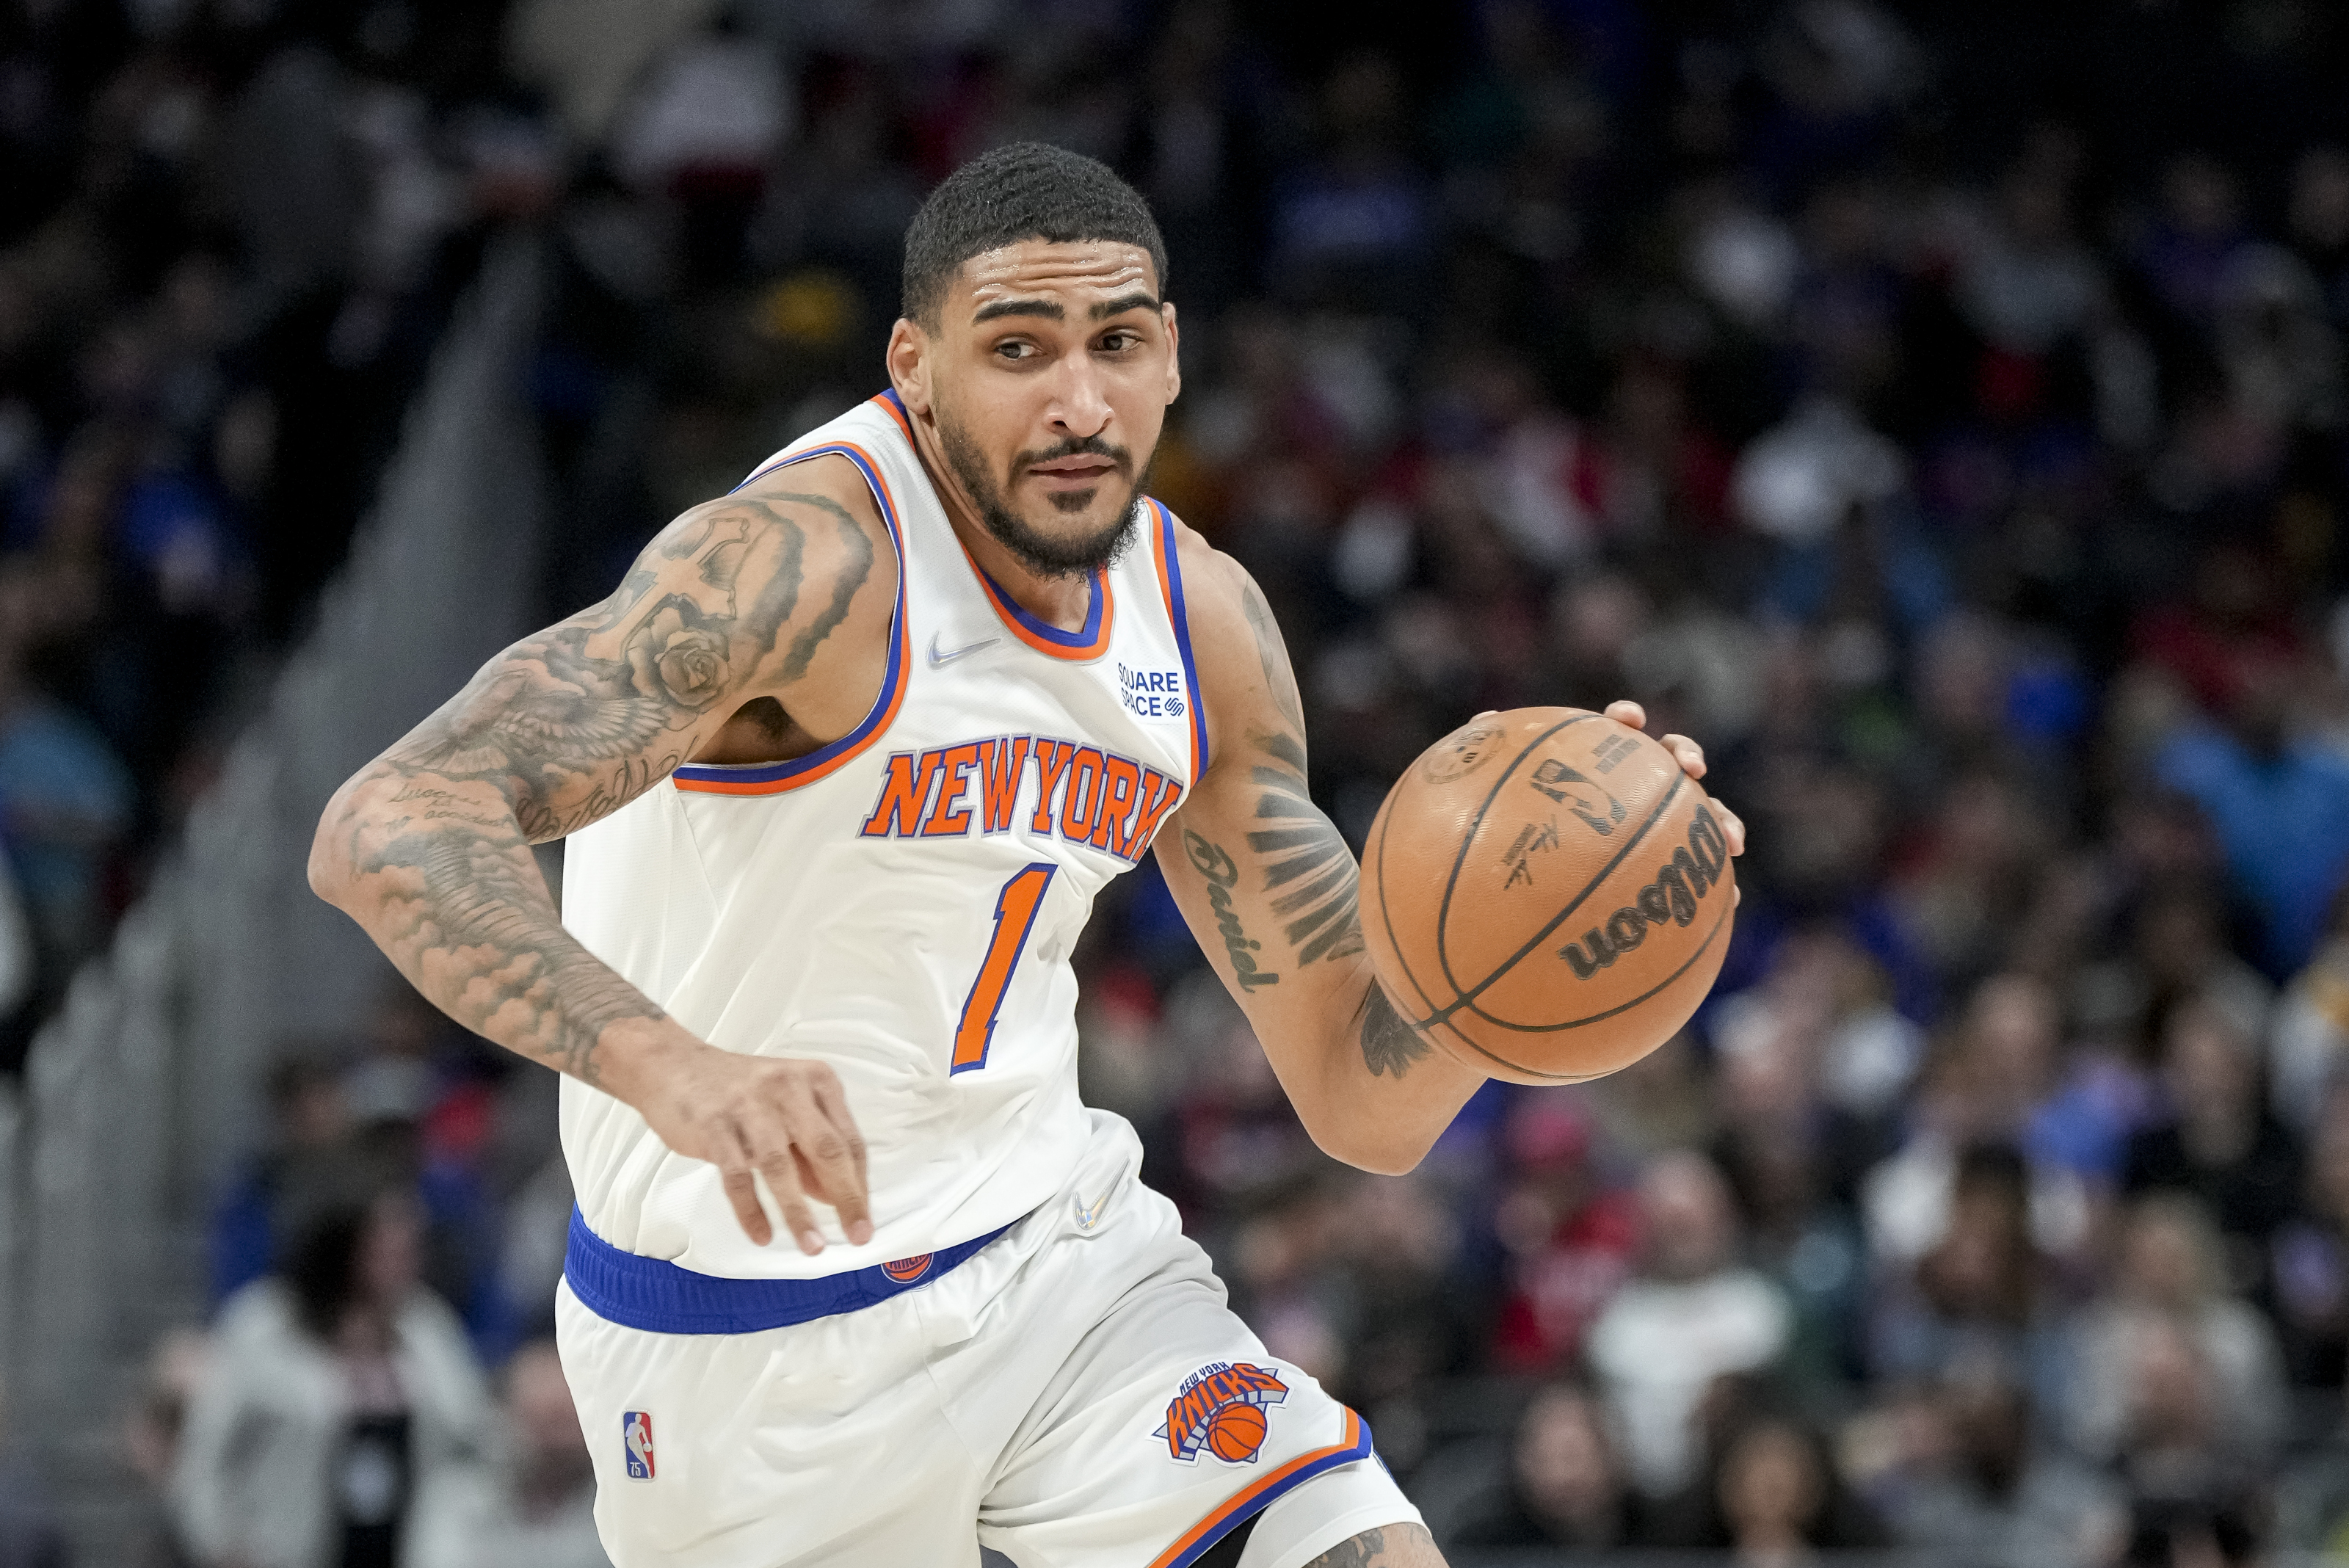 Obi Toppin previews high energy Knicks' second unit can bring